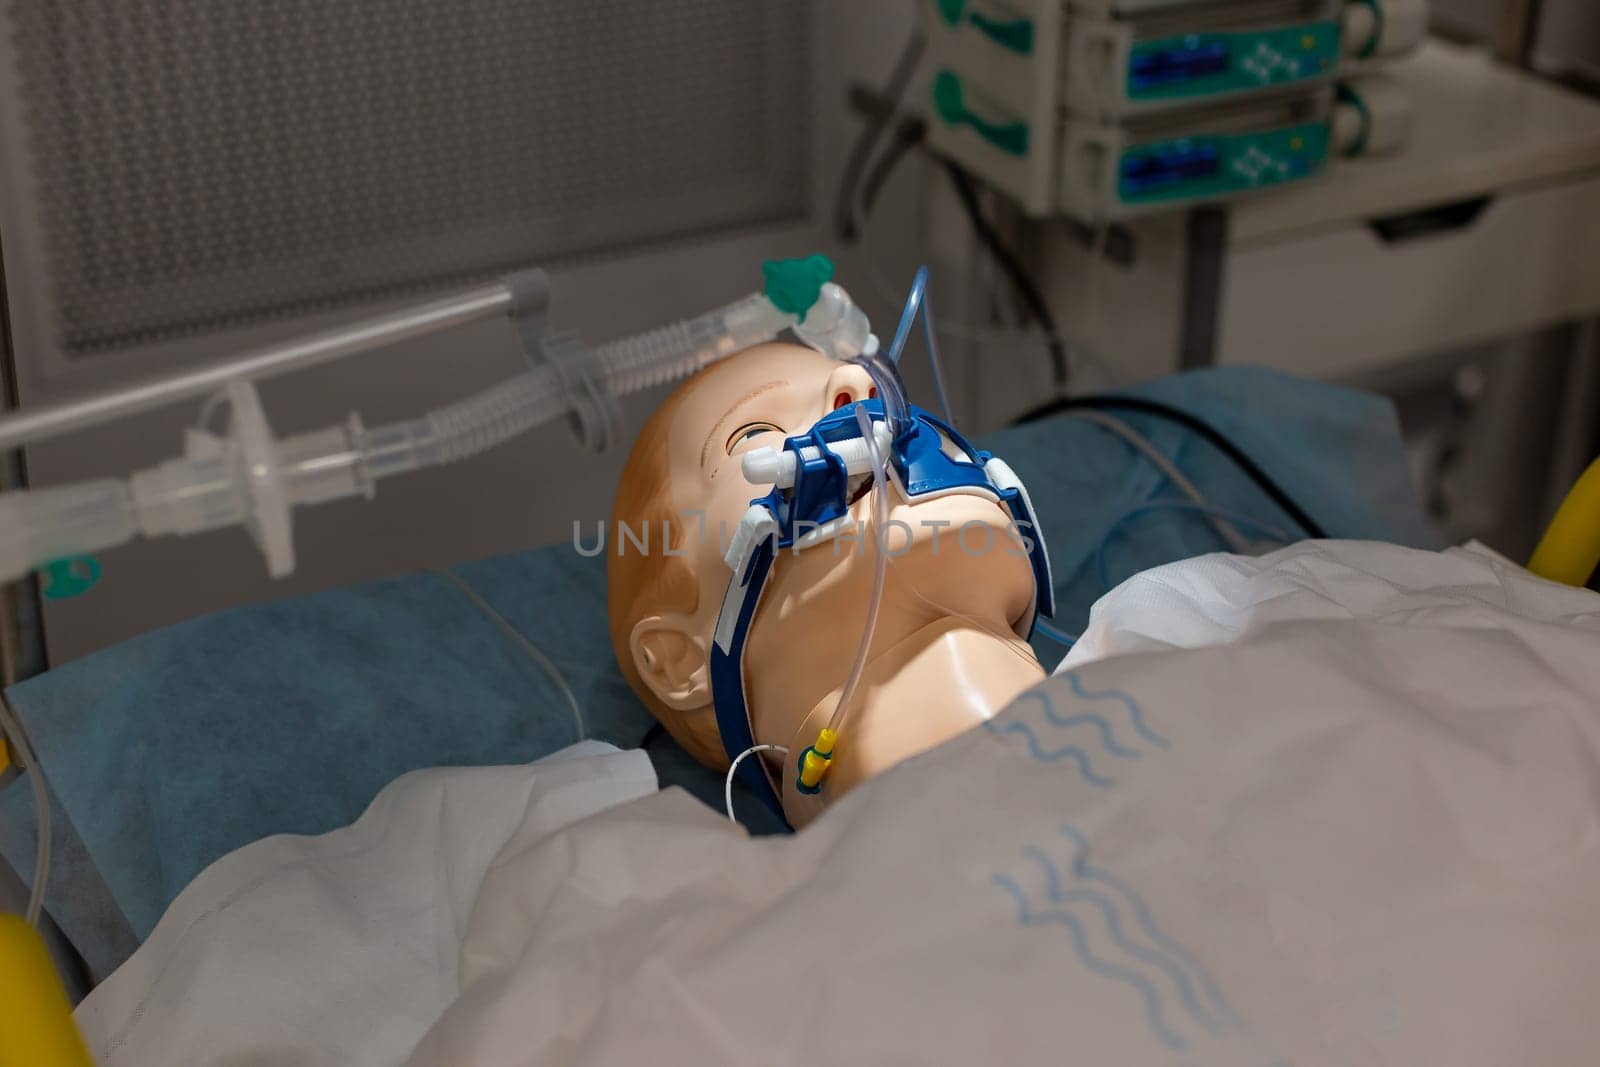 Moscow, Moscow region, Russia - 03.09.2023:Close-up of a medical practice dummy wearing an oxygen mask by Zakharova